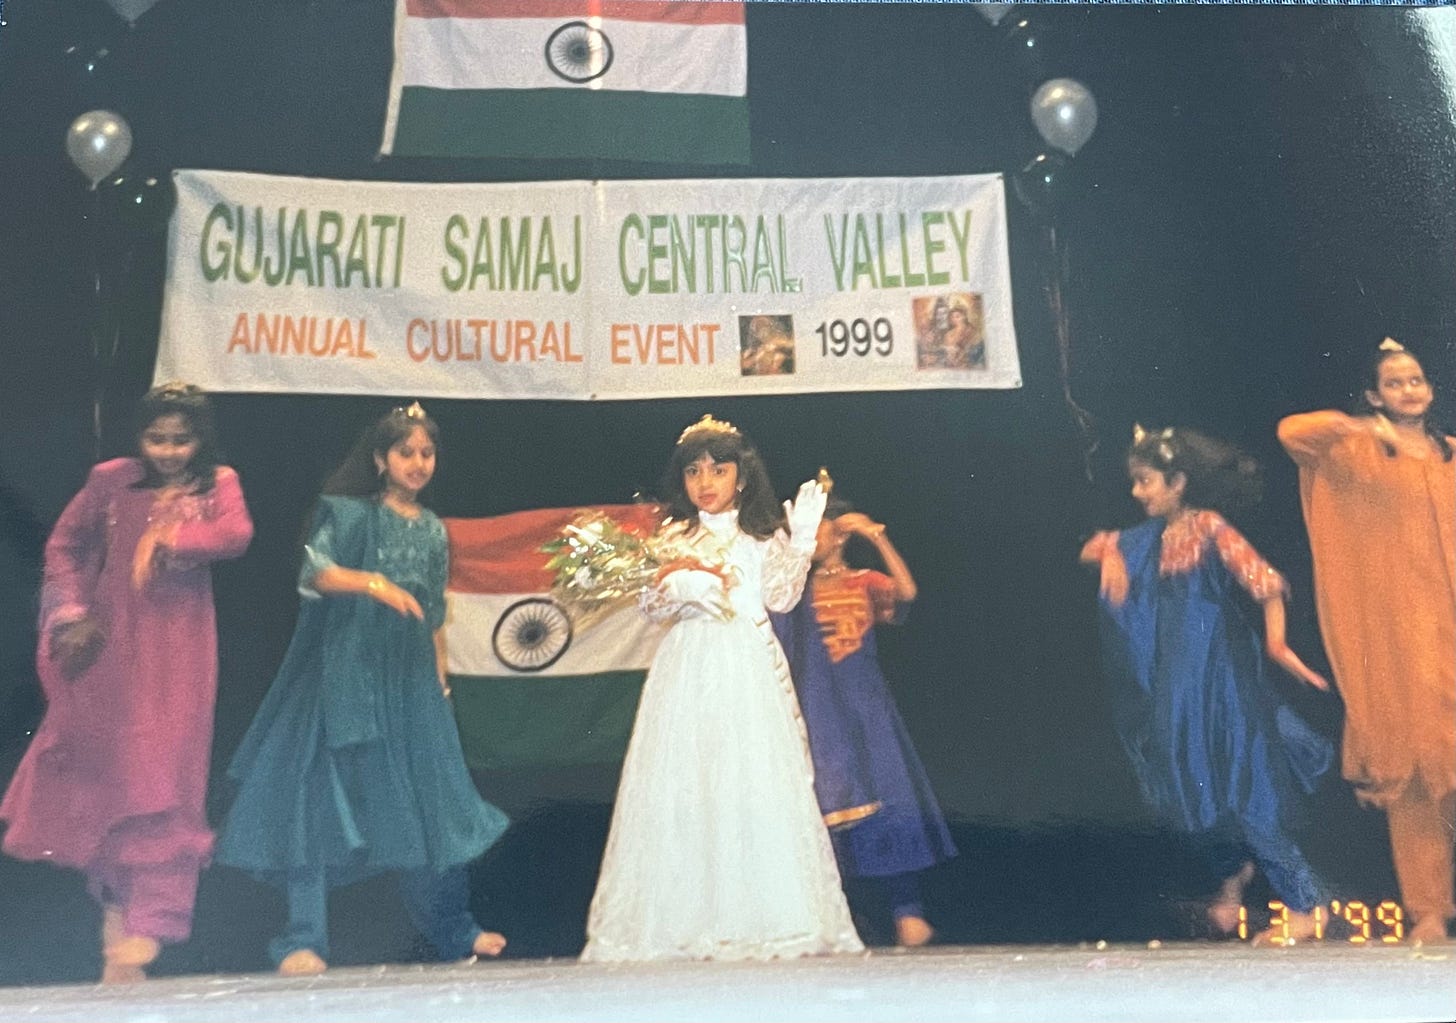 A 5-year-old Indian girl wears a white dress, tiara, and sash as she stands onstage. Surrounding her are other Indian girls, dancing in salwaar kameez outfits of differing colors. 